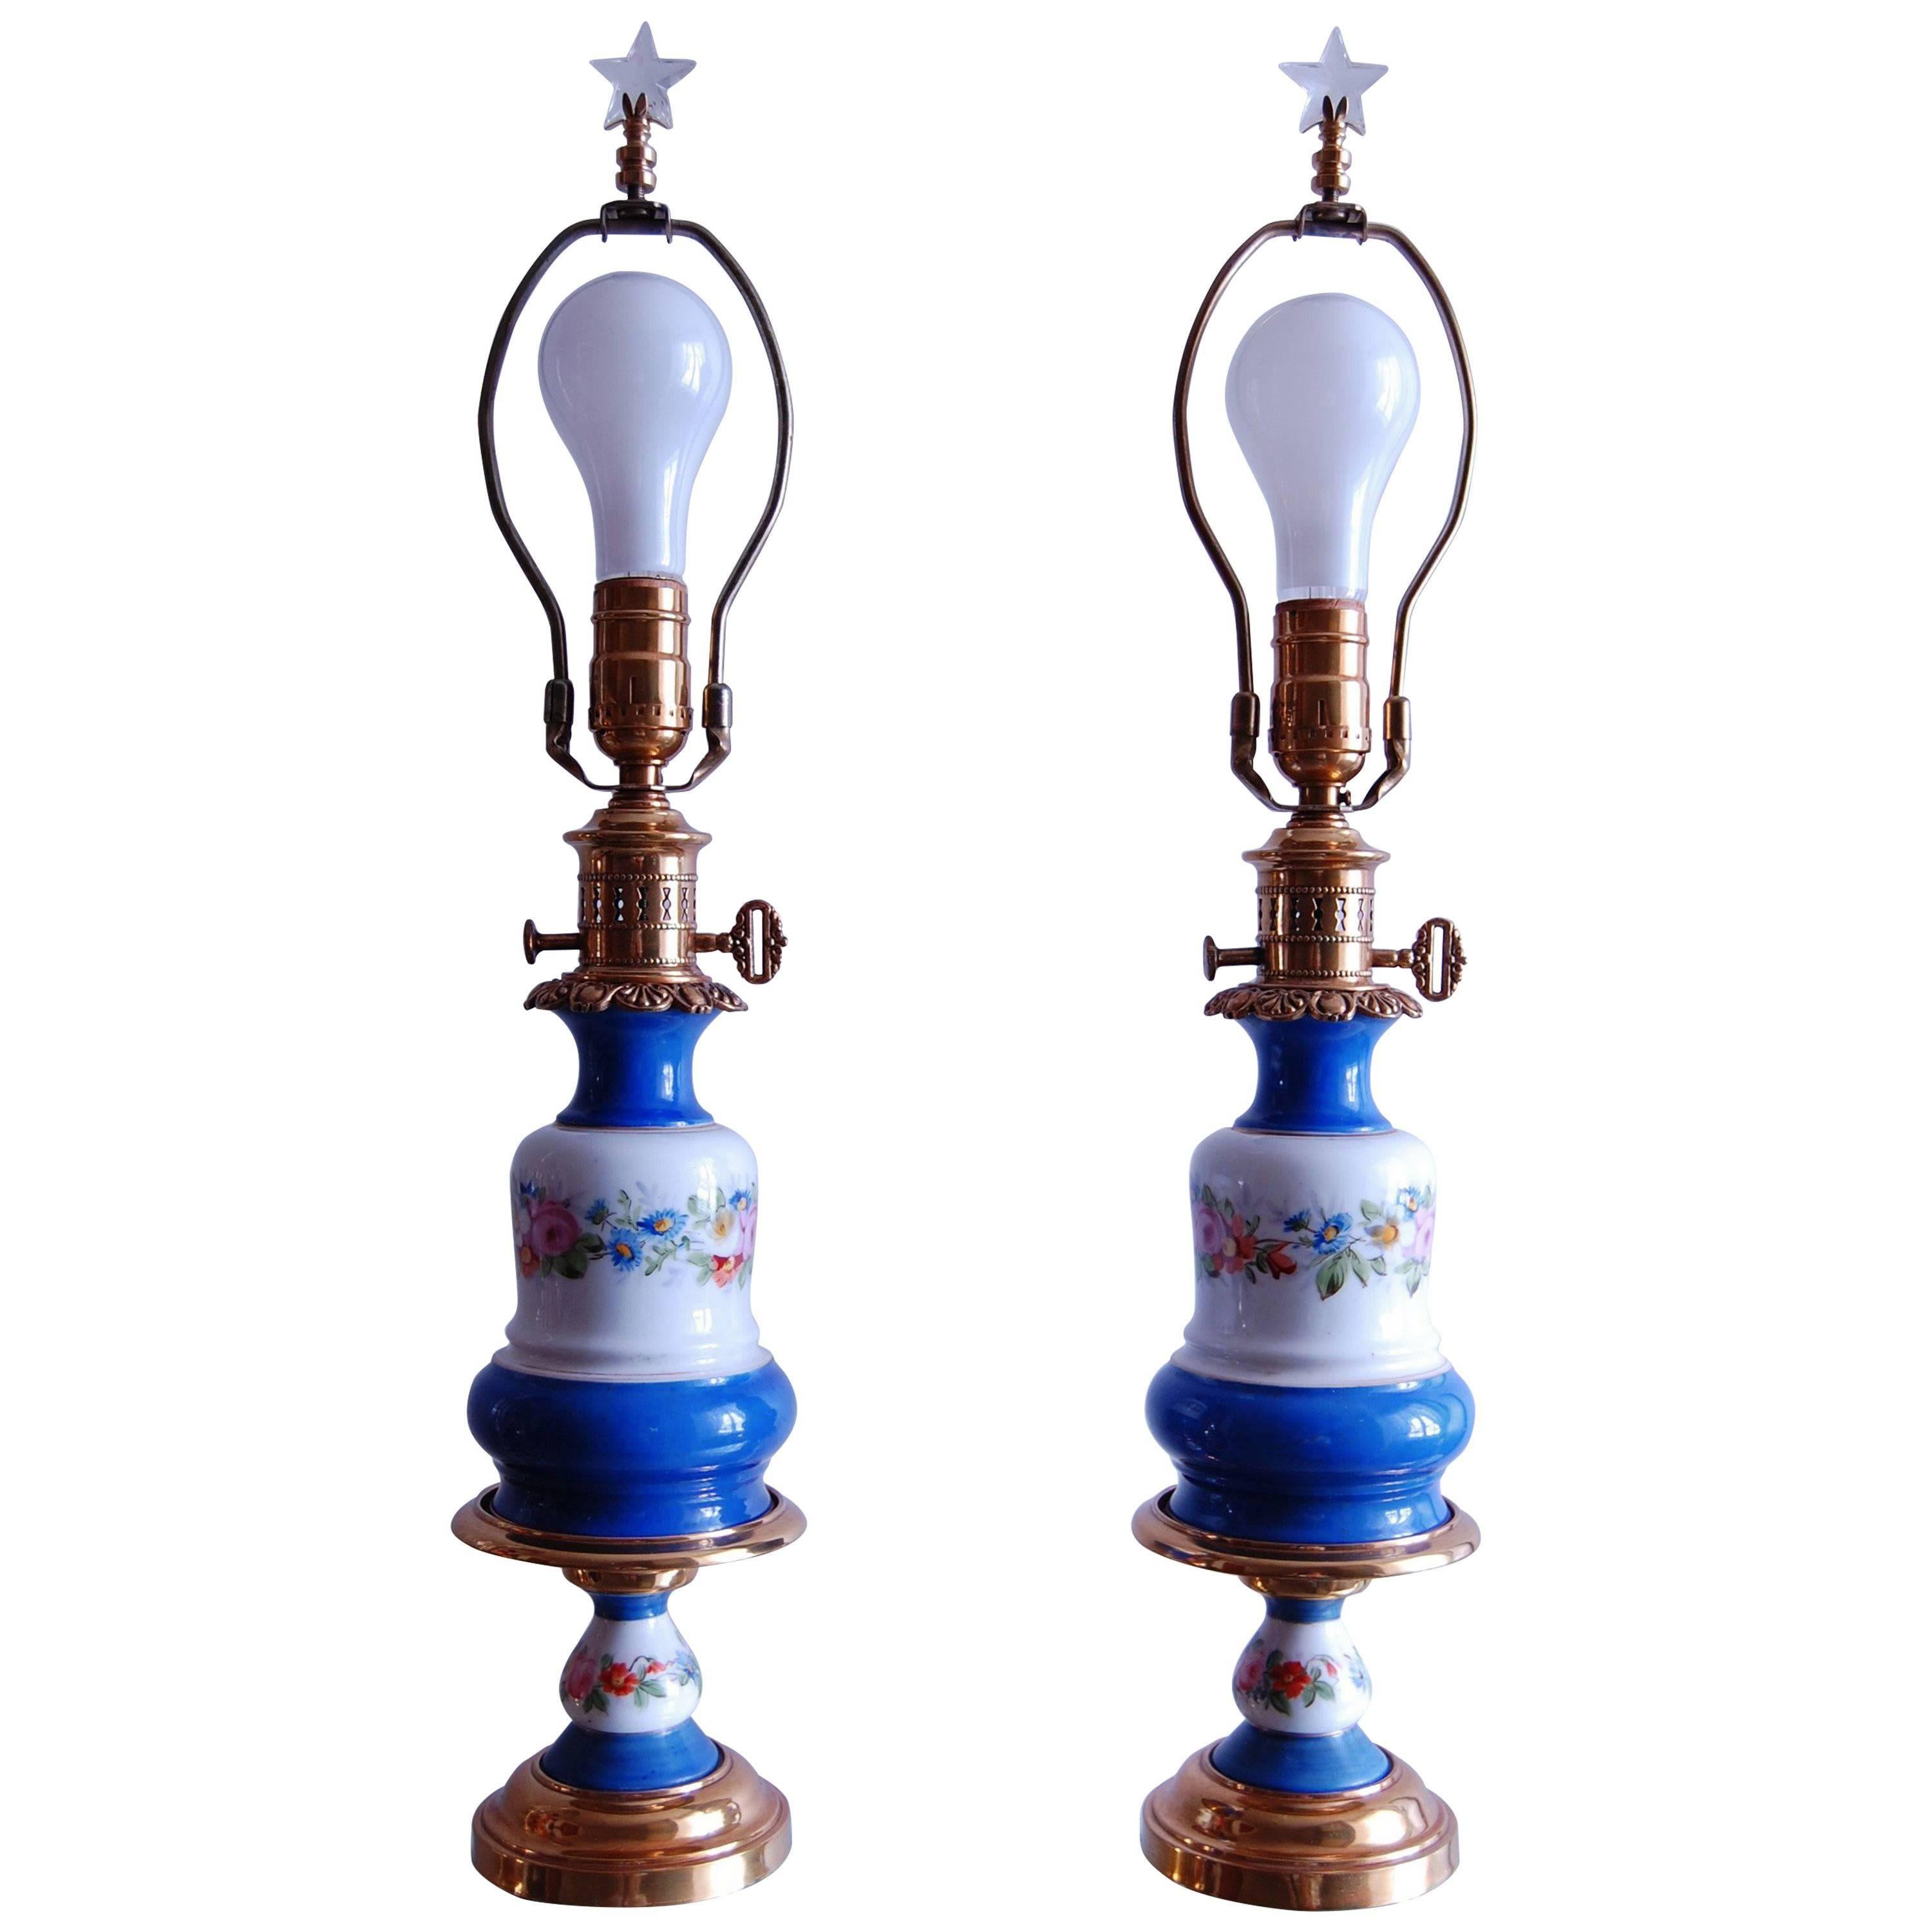 Pair of Floral Decorated French Porcelain Oil Lamps, Likely Sevres, circa 1850 For Sale